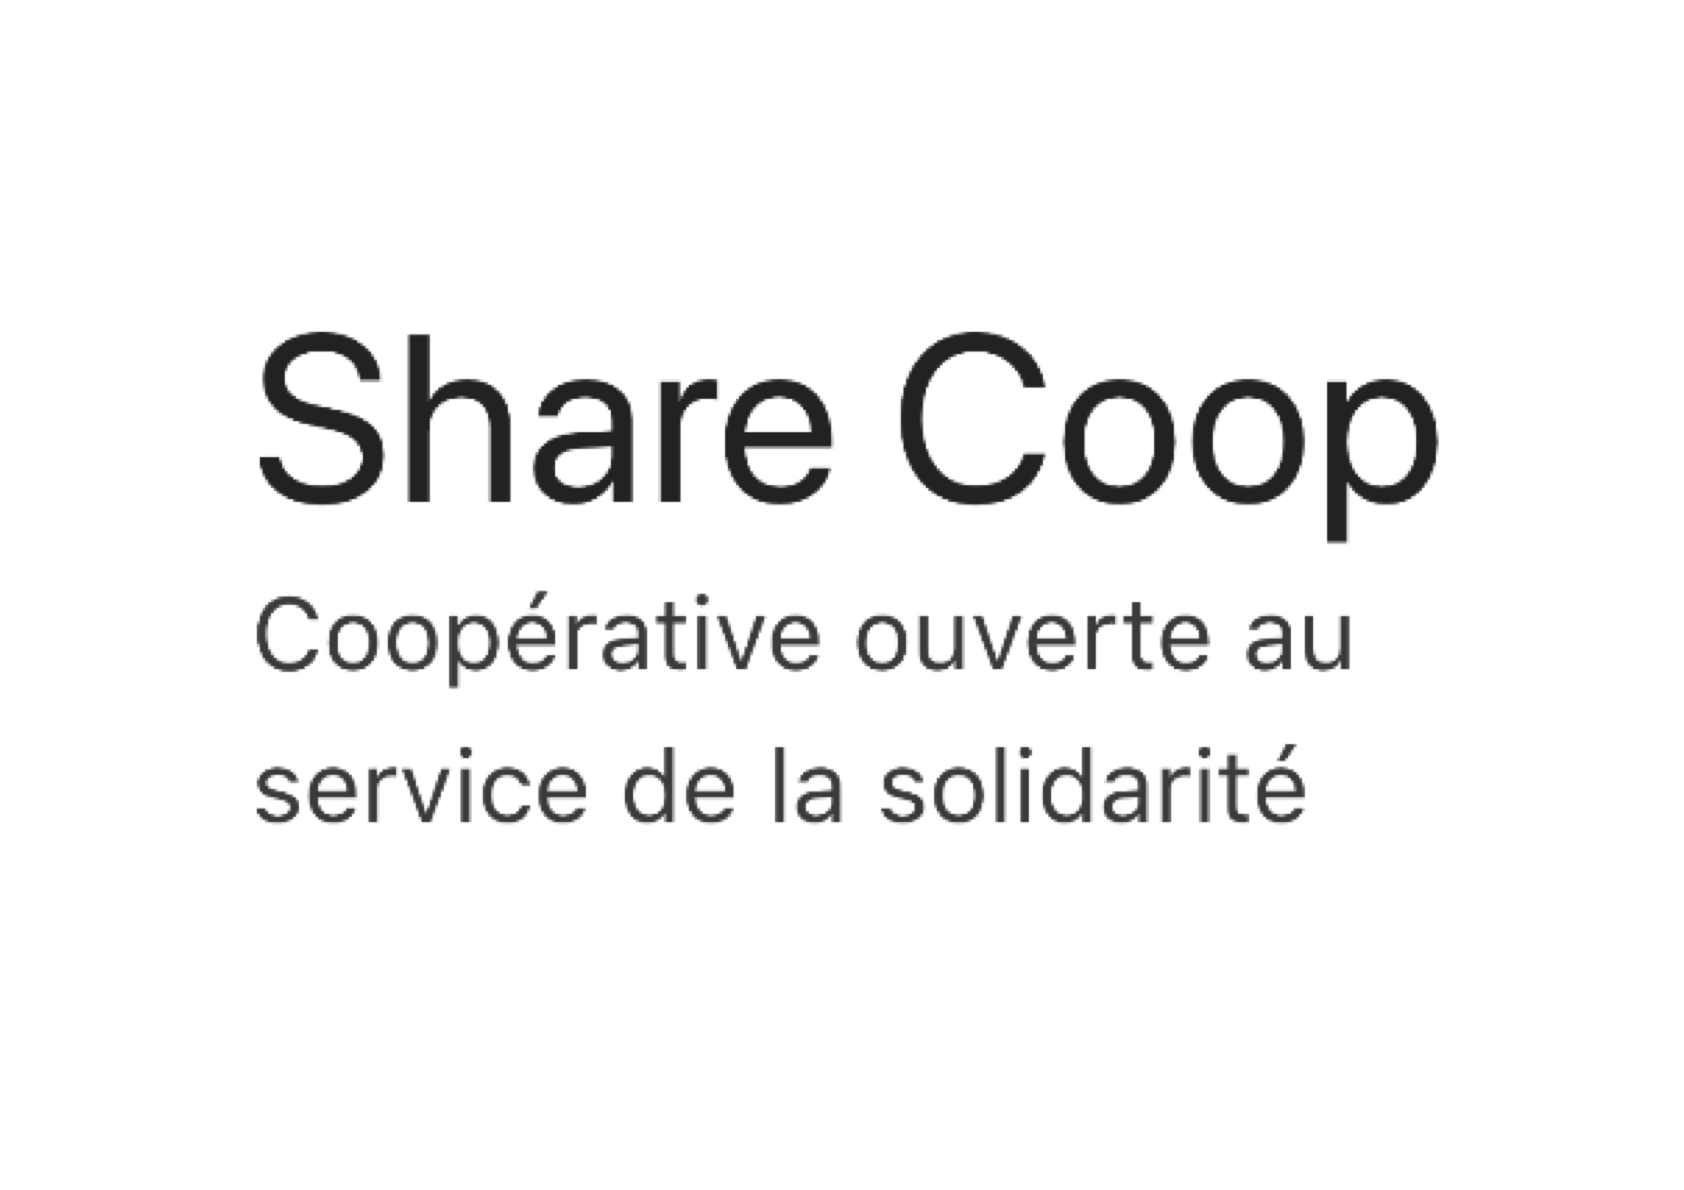 Share Coop